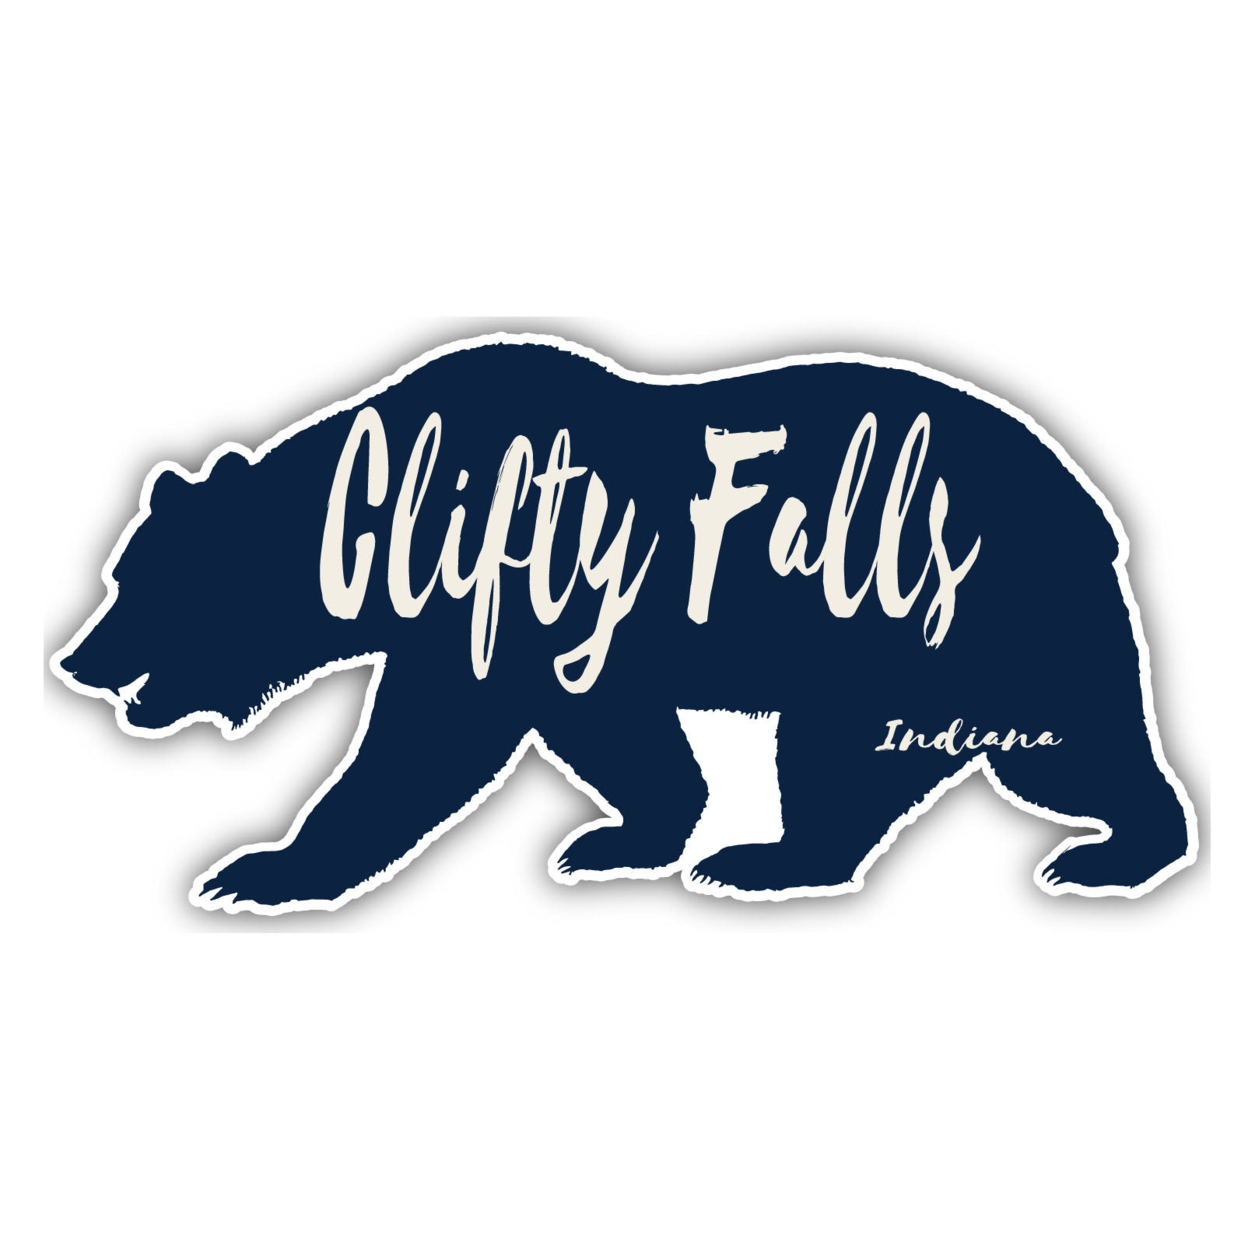 Clifty Falls Indiana Souvenir Decorative Stickers (Choose Theme And Size) - 4-Pack, 2-Inch, Great Outdoors